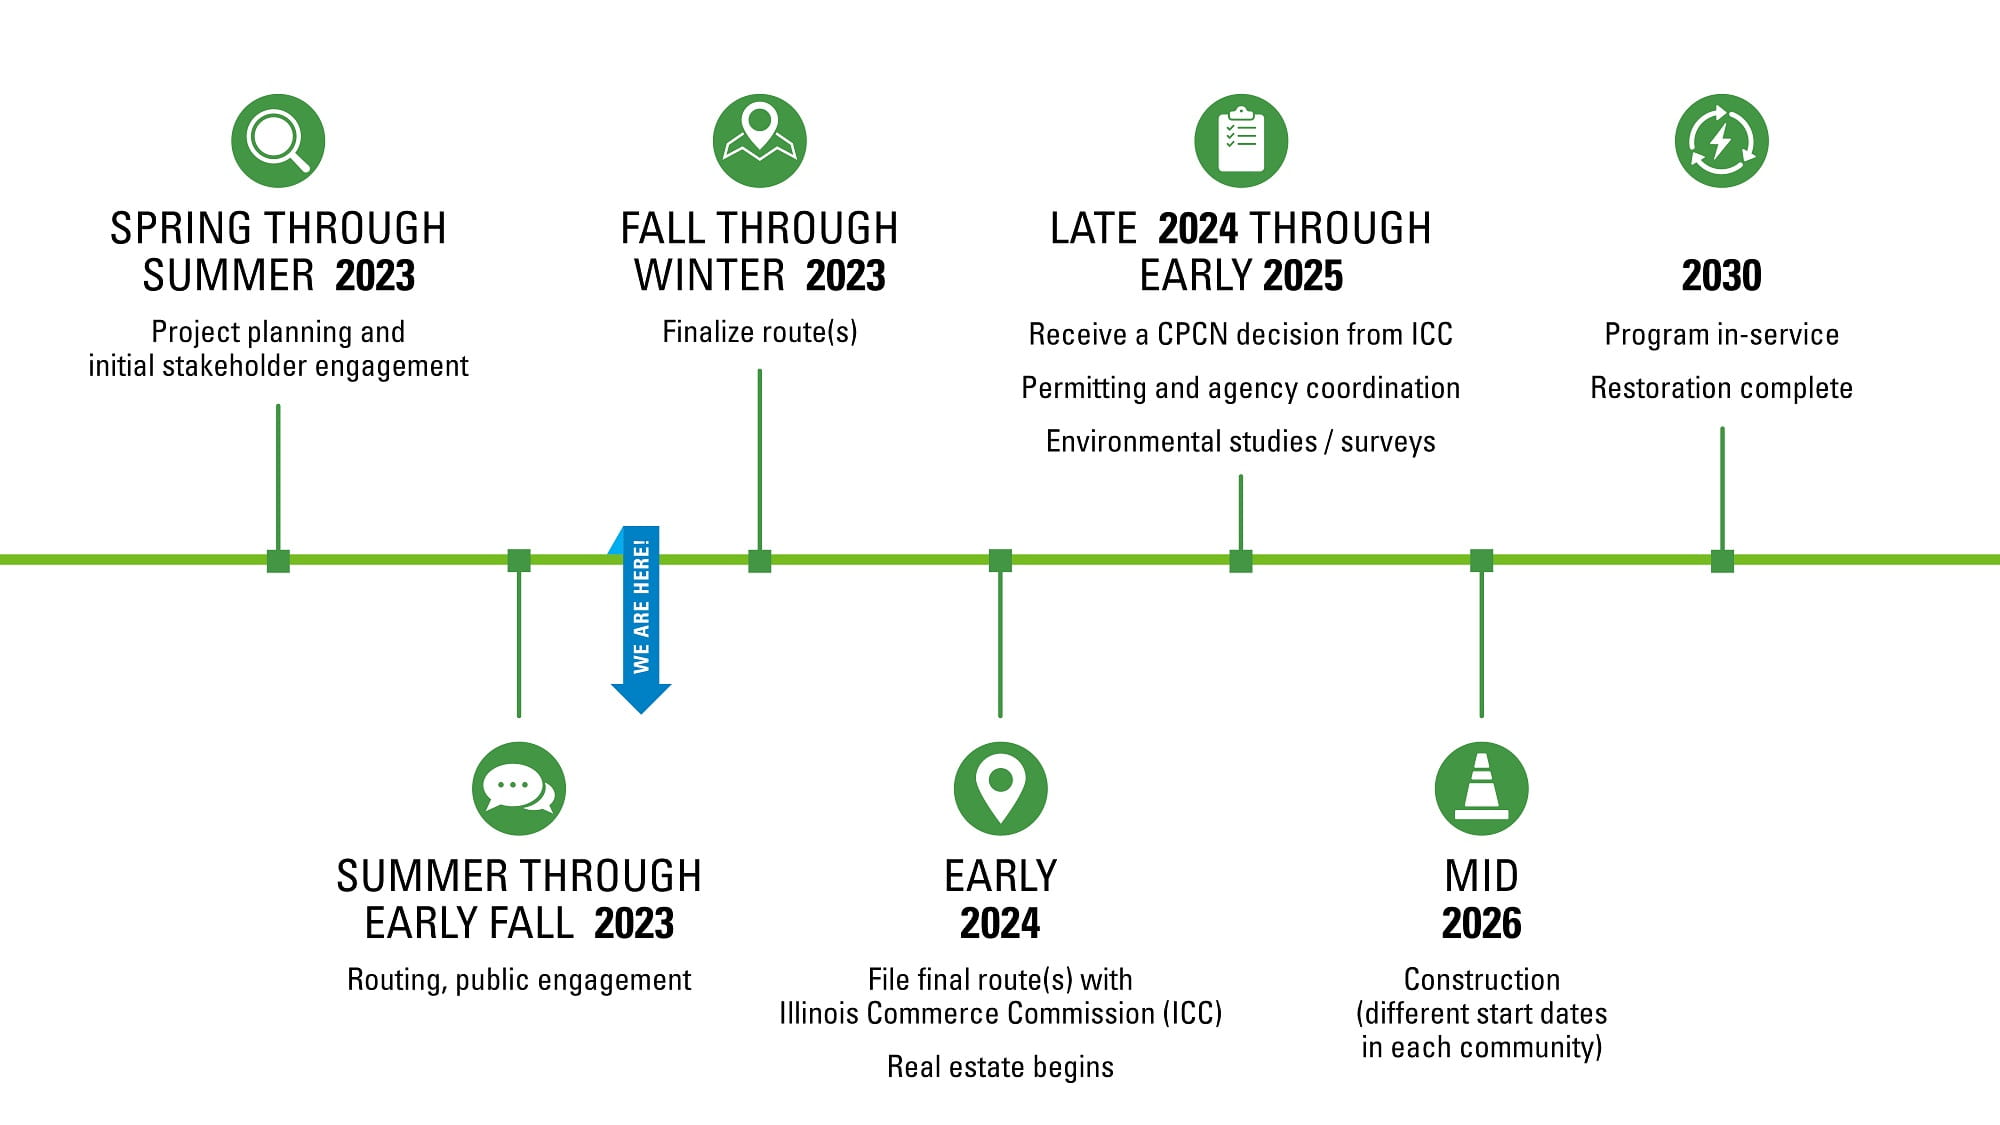 Central IL transformation timeline graphic starting in 2023 and ending in 2030